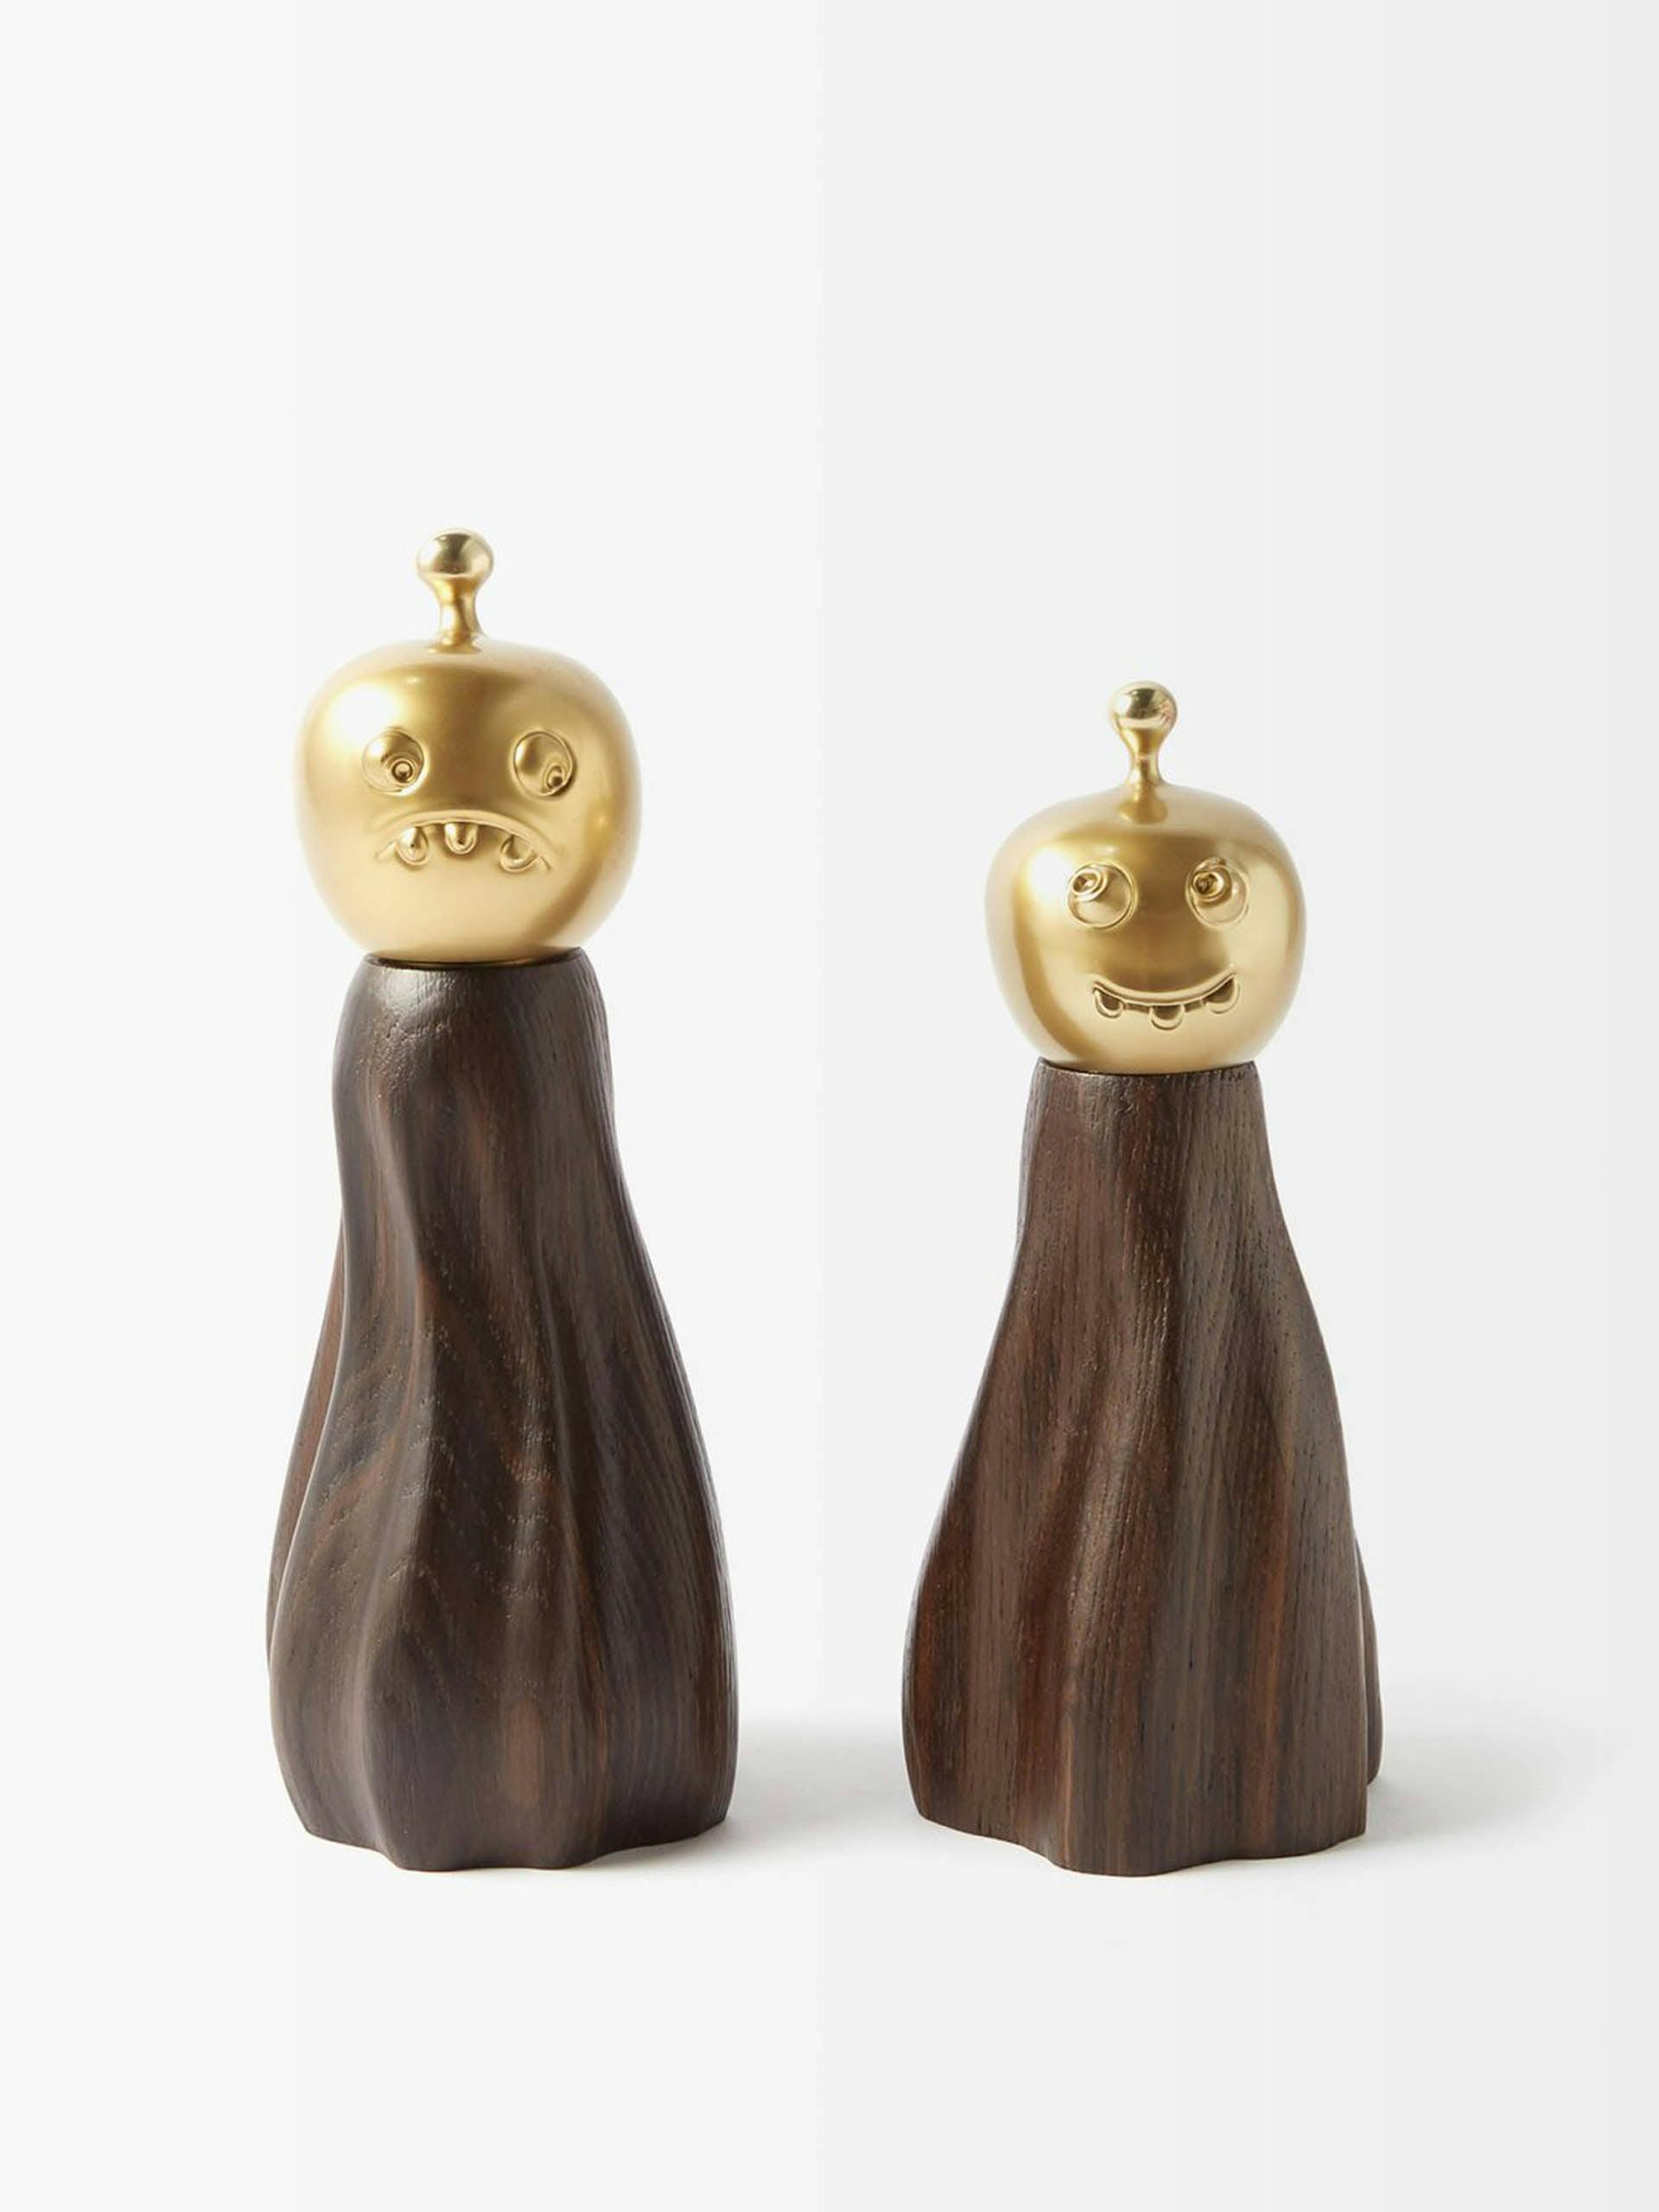 Wood and 24kt gold salt and pepper mills